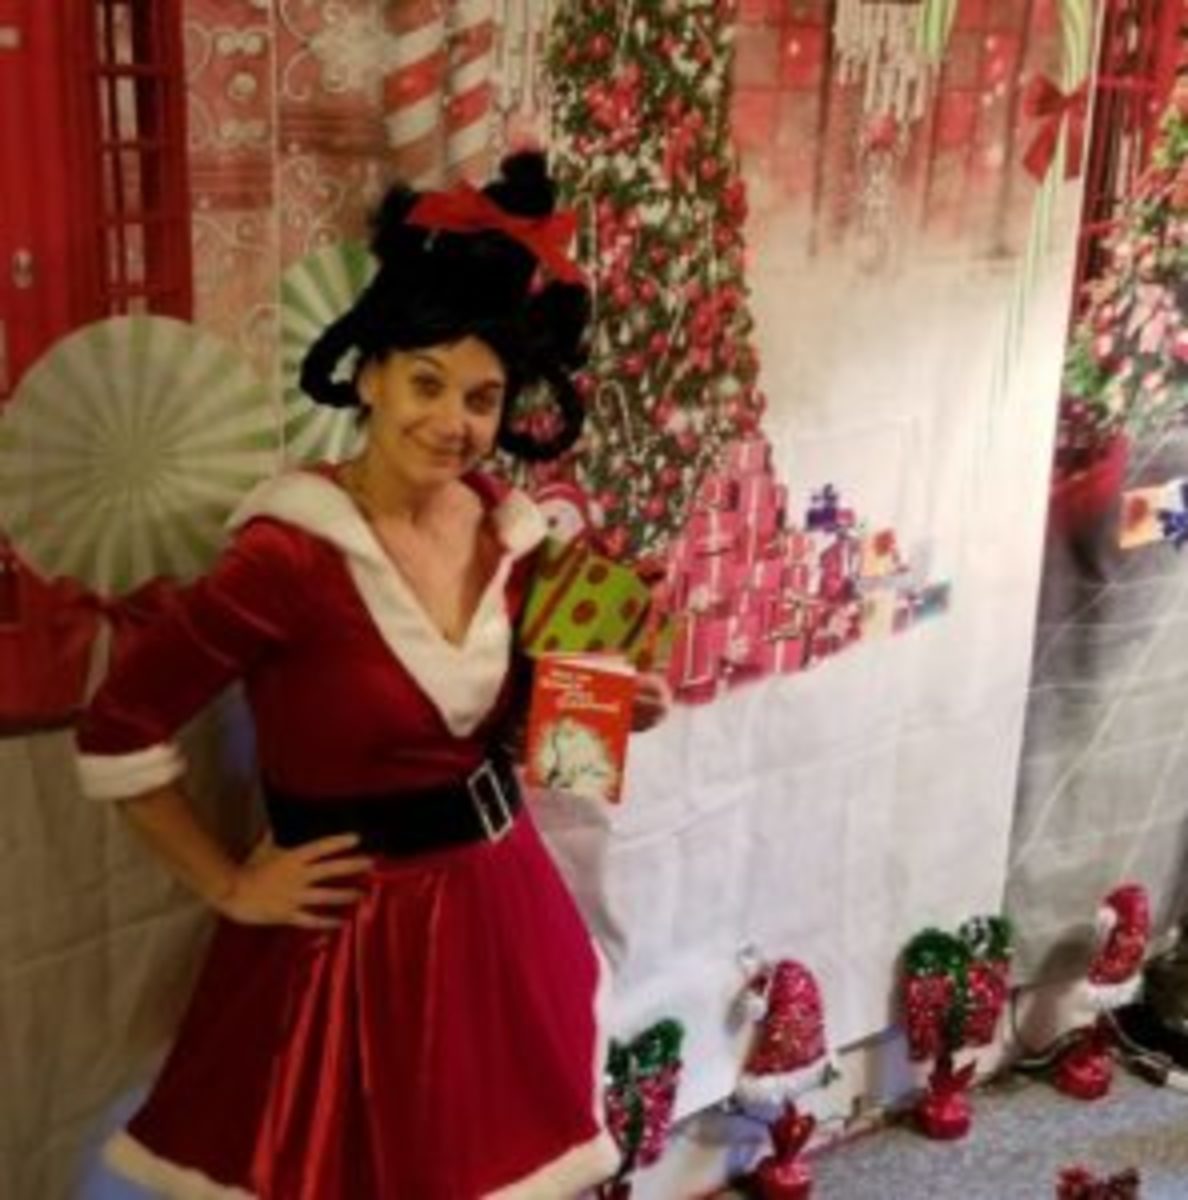  SherieLee Schnell dressed up as Little Cindy Lou Who when Marshmallow World’s theme was “A Whoville Christmas.”